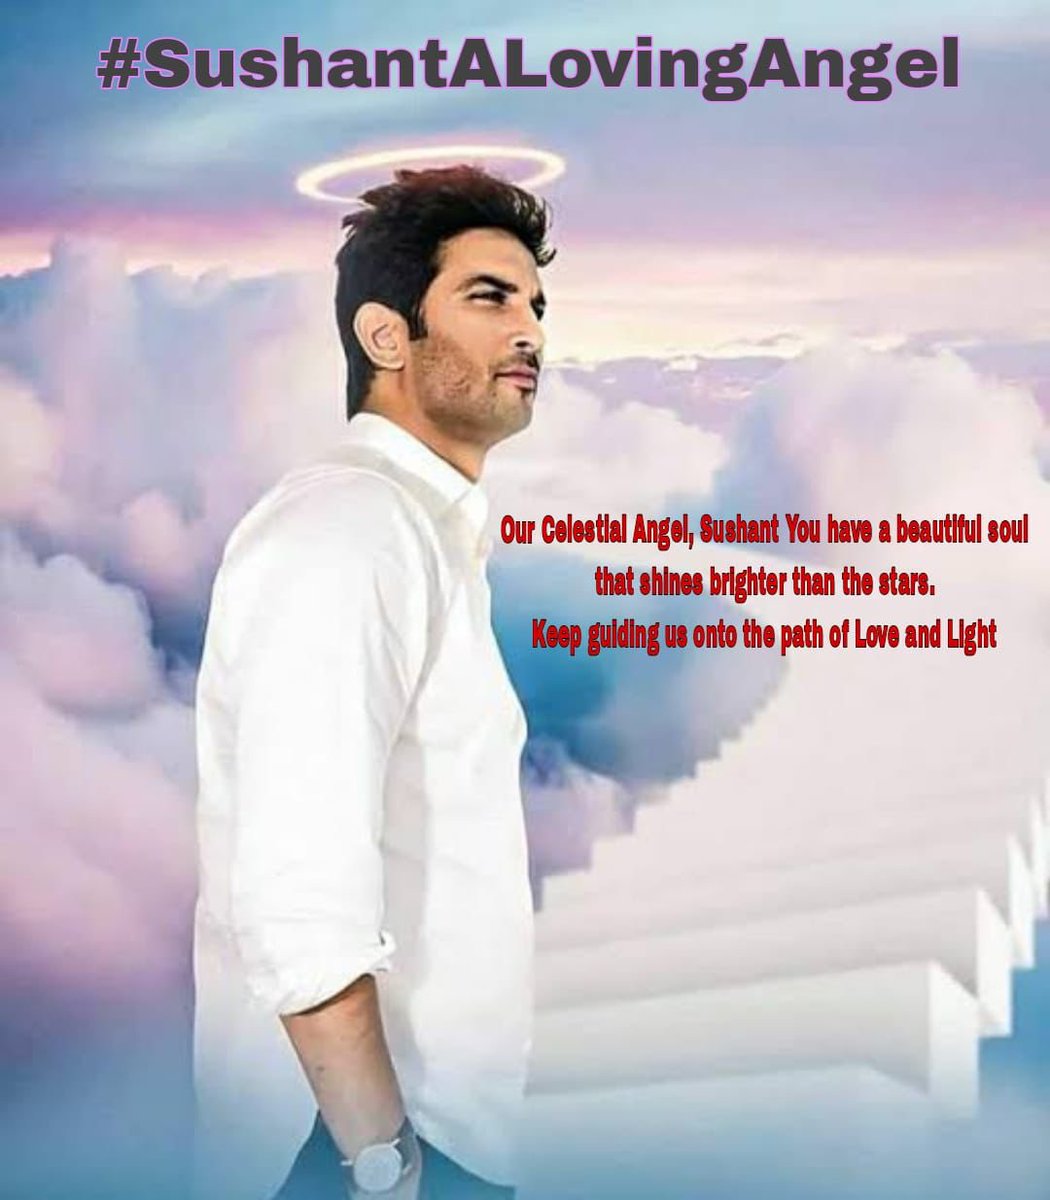 When angels visit us, we do not hear the rustle of wings, nor feel the feathery touch of the breast of a dove, but we know their presence by the love they create in our hearts. Sushant indeed is Our Loving angel, a messenger of God #SushantALovingAngel